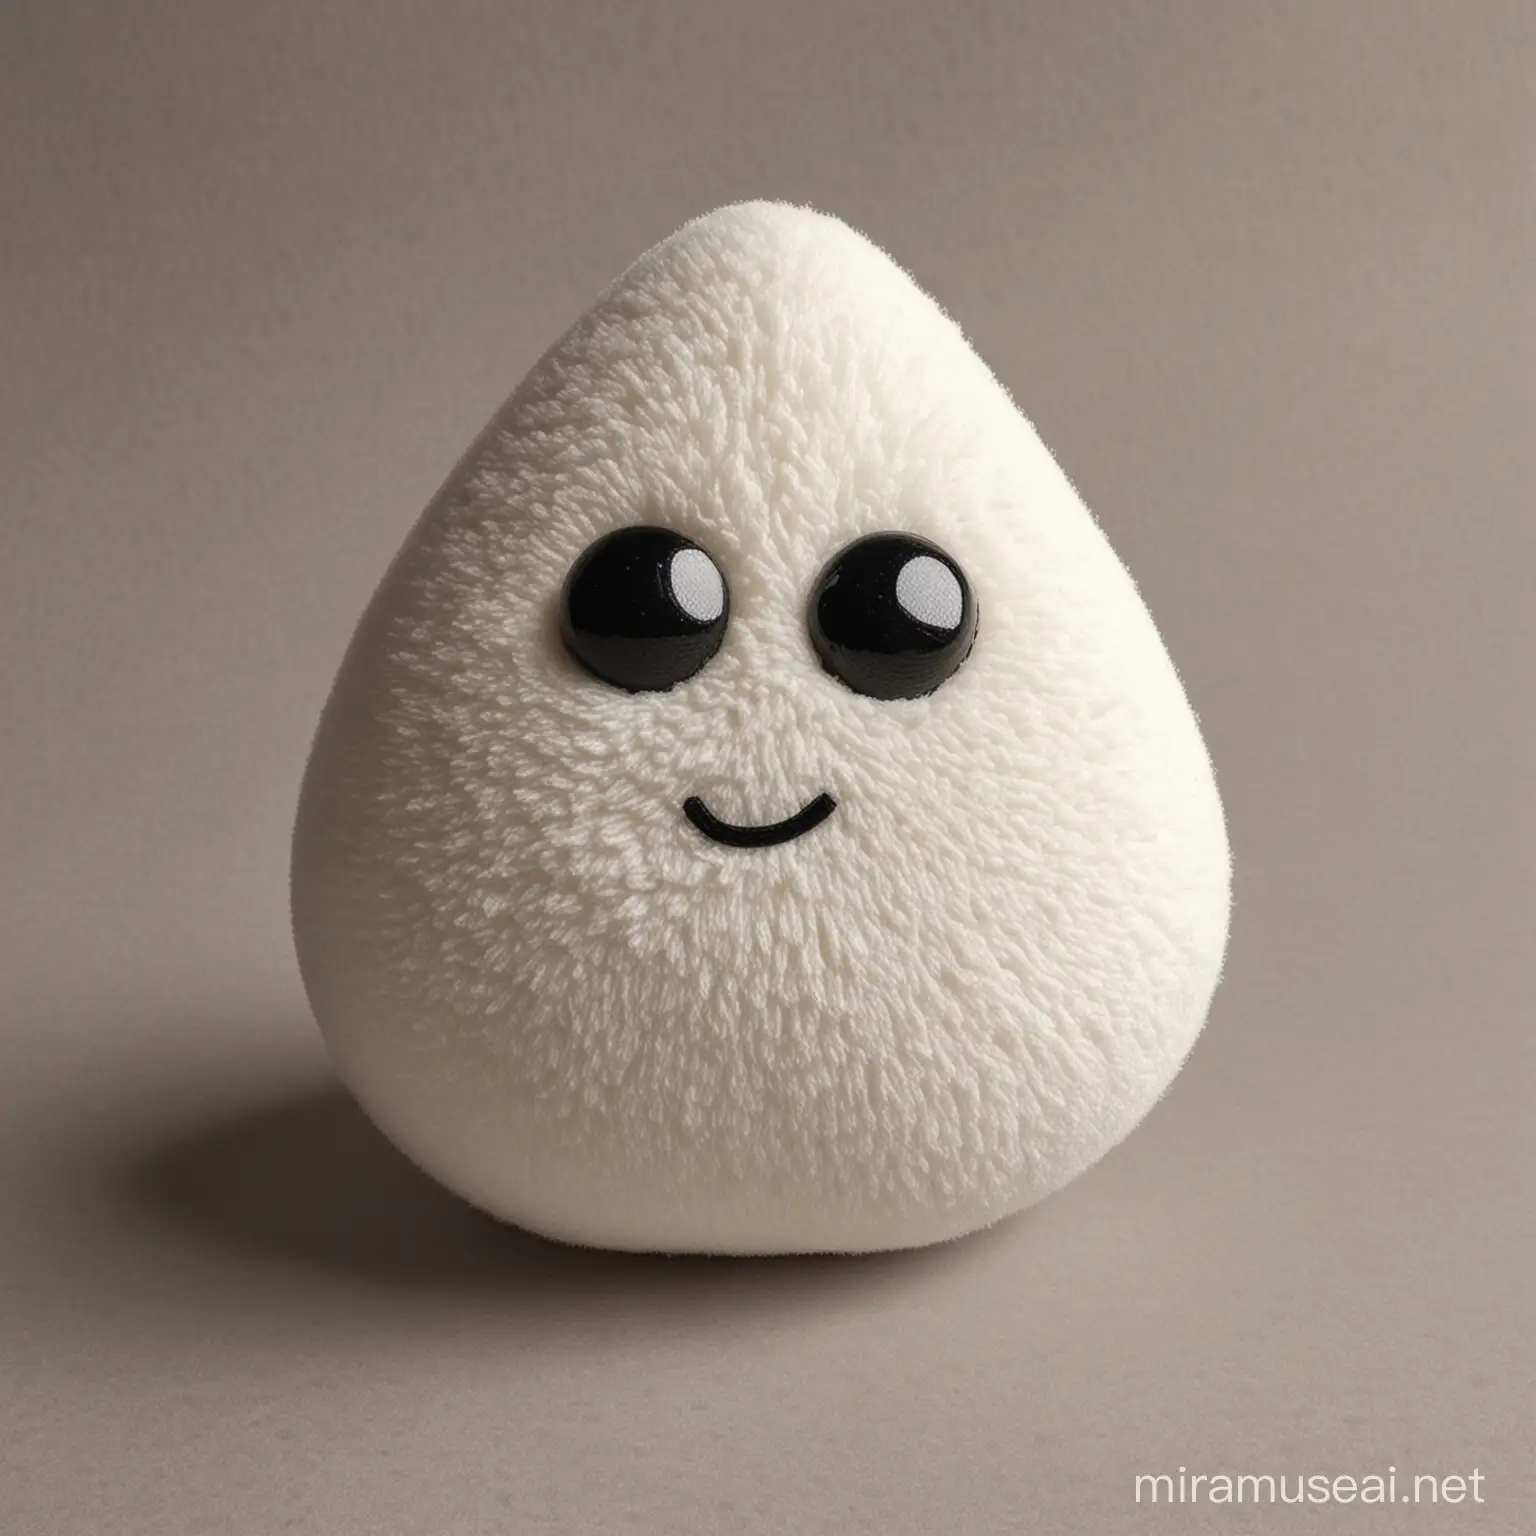 Adorable 3D GumdropShaped Stuffed Toy with Minimalistic Design